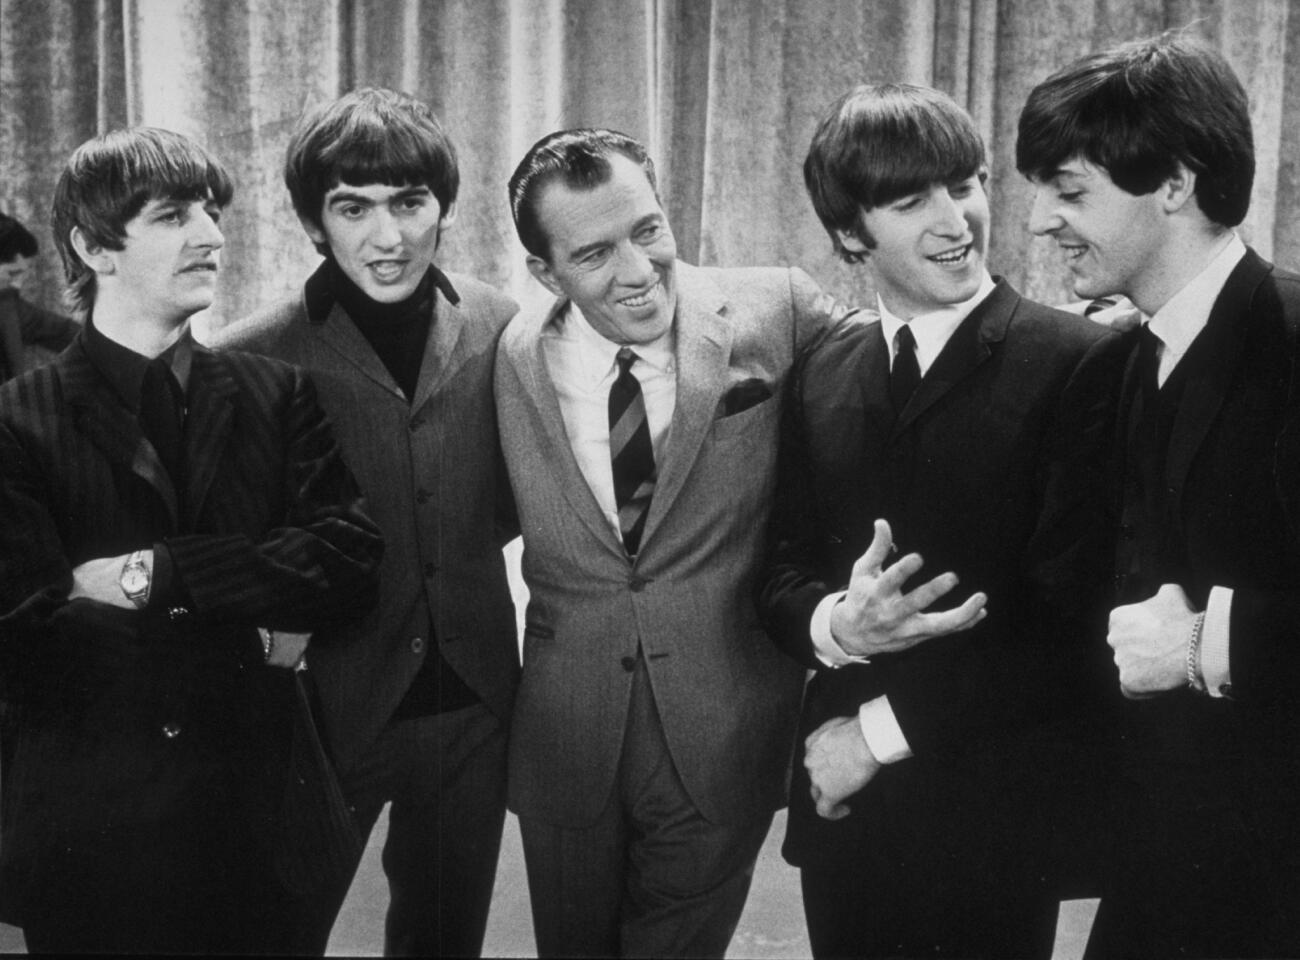 The Beatles' first appearance on the 'Ed Sullivan Show'